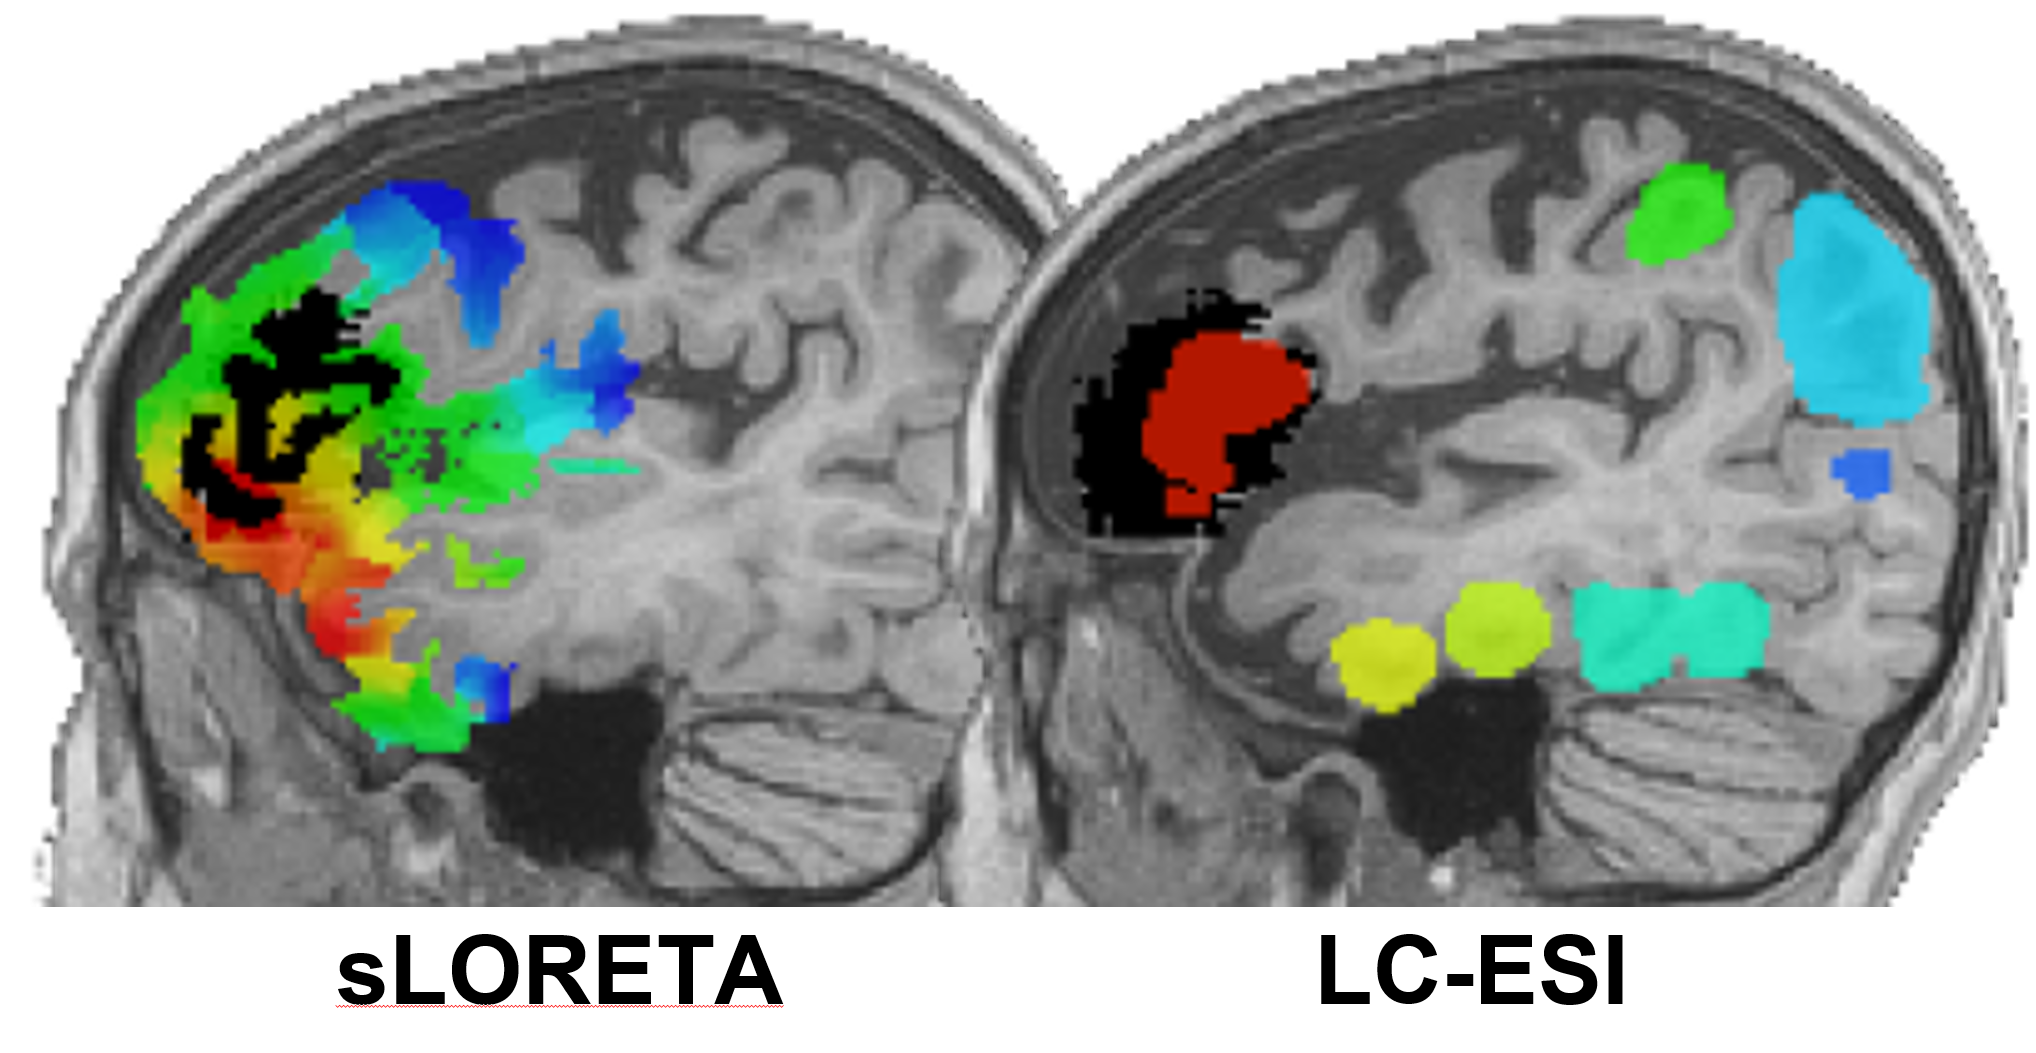 Two scans of brains with the first image highlighting sLORETA and the second image highlighting LC-ESI.